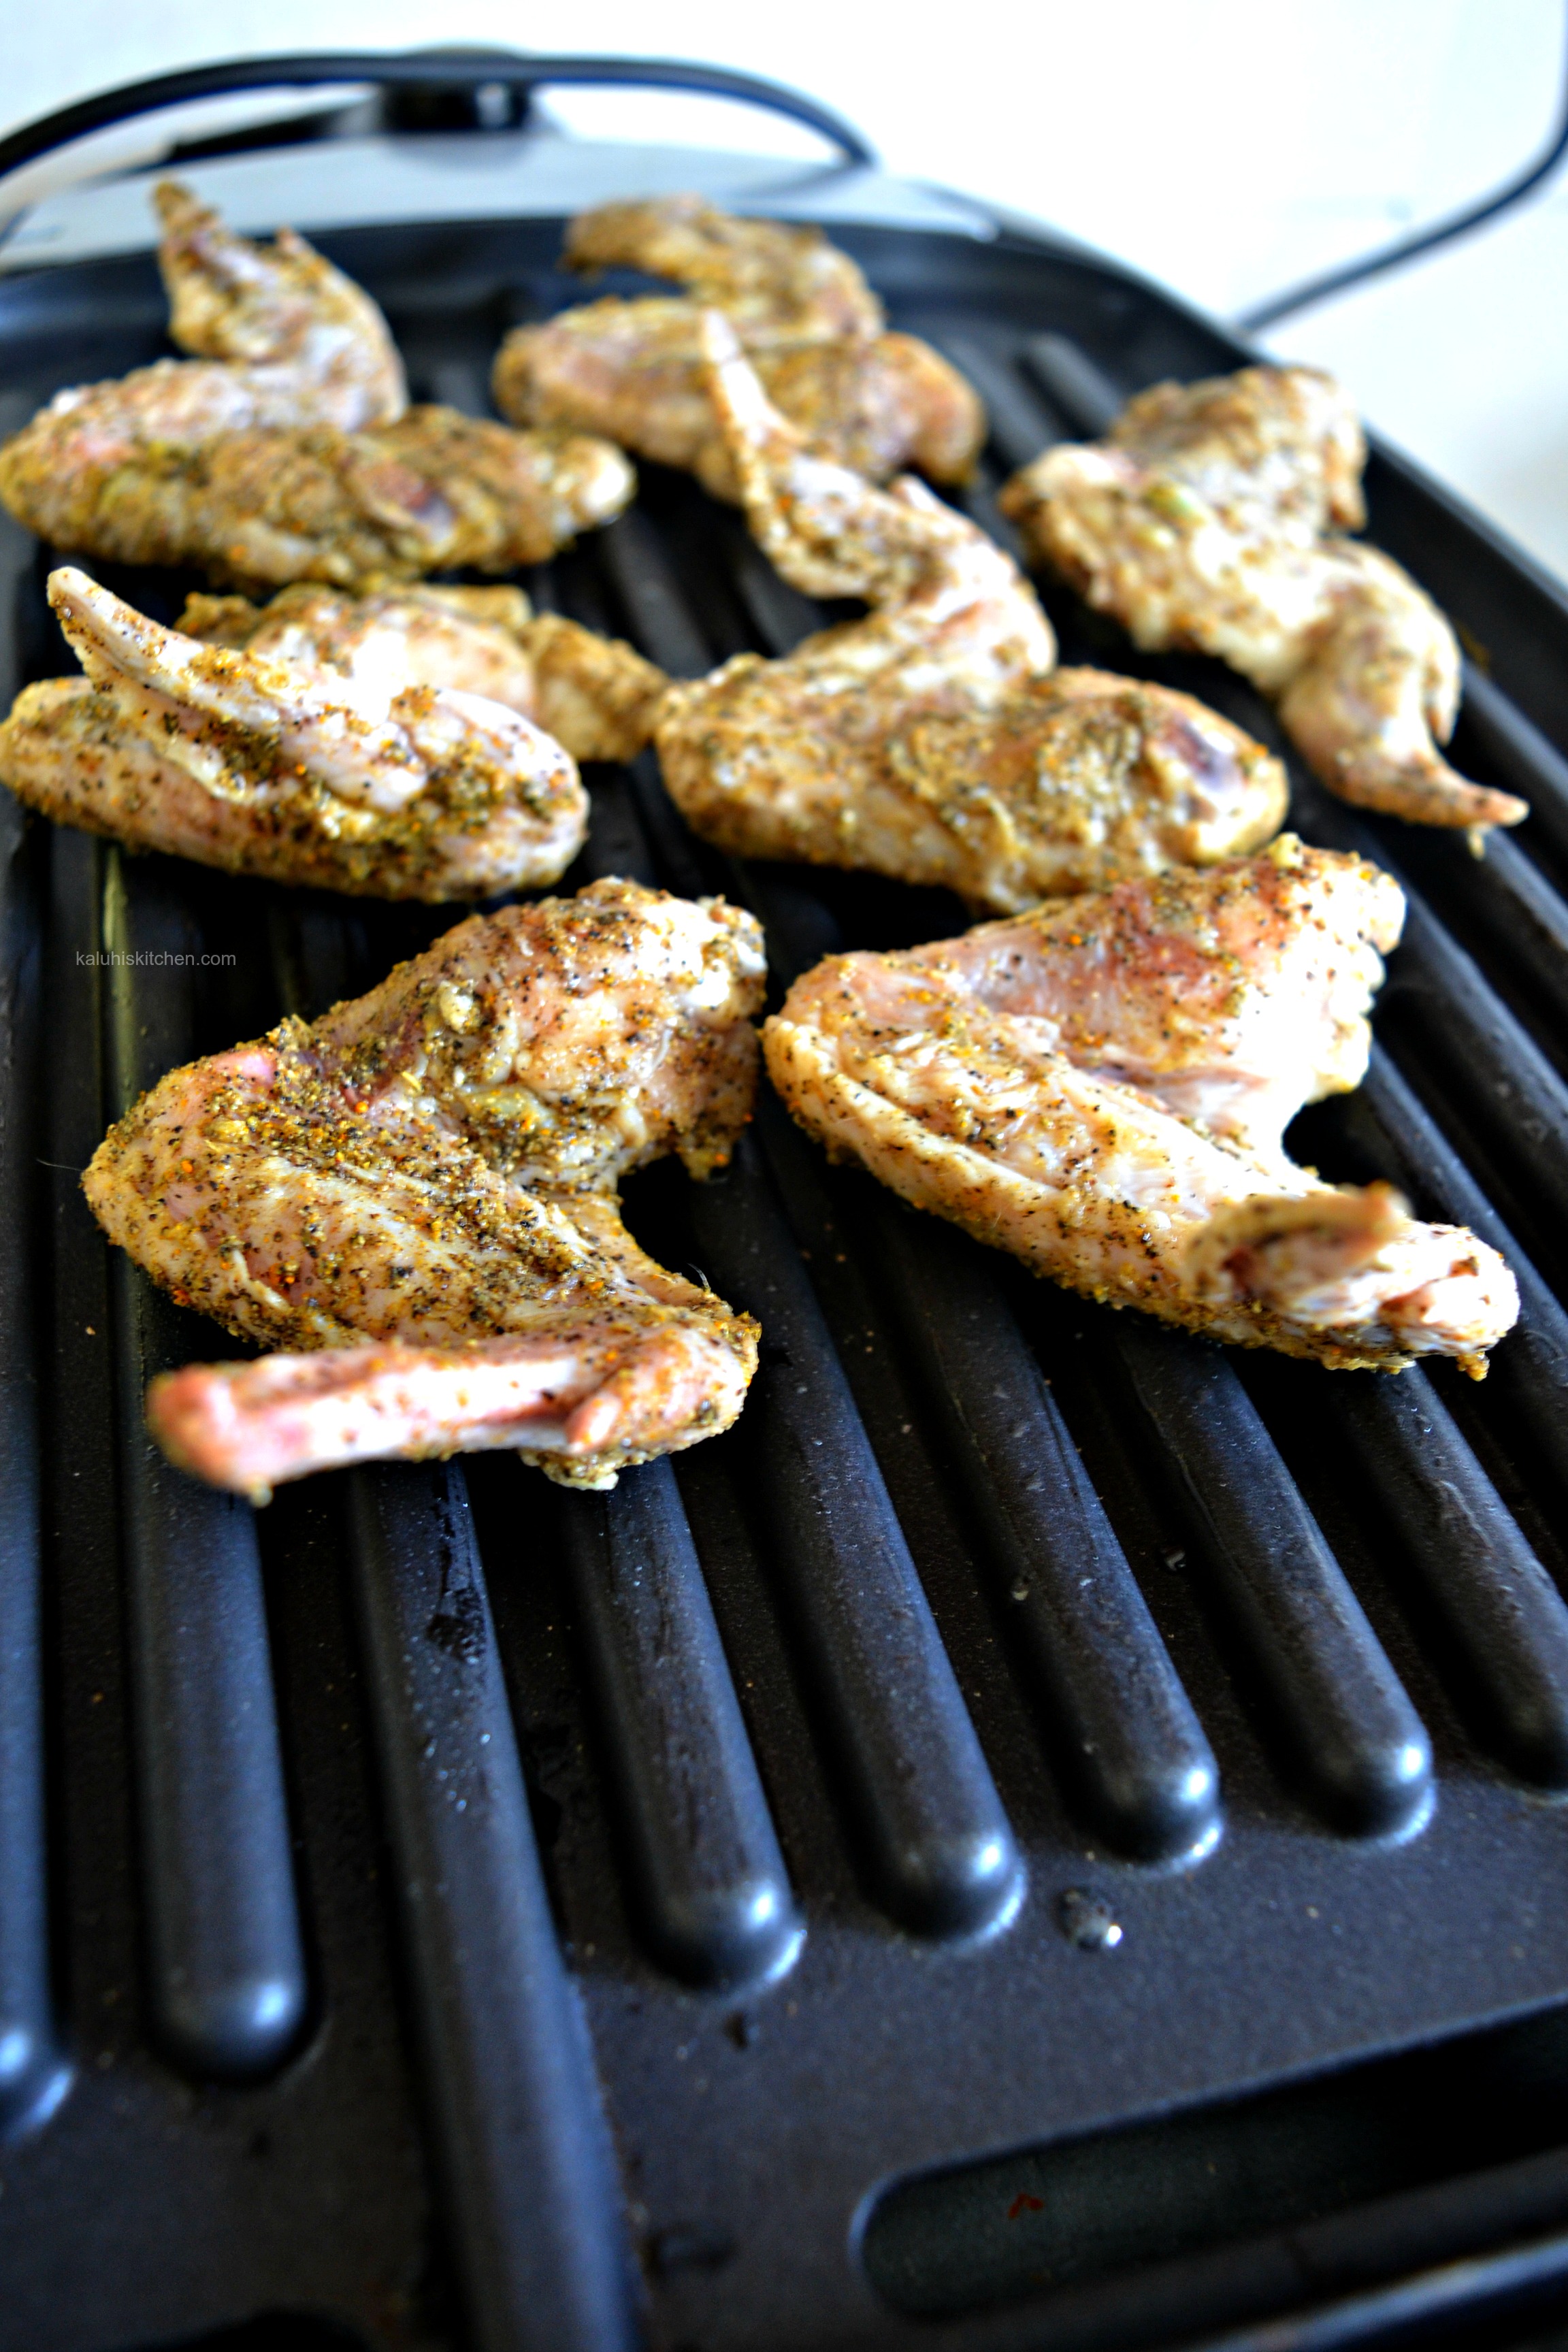 brandy marinated chicken wings_grilling chicken wings_chicken wings seasoning_african food bloggers_kaluhiskitchen.com